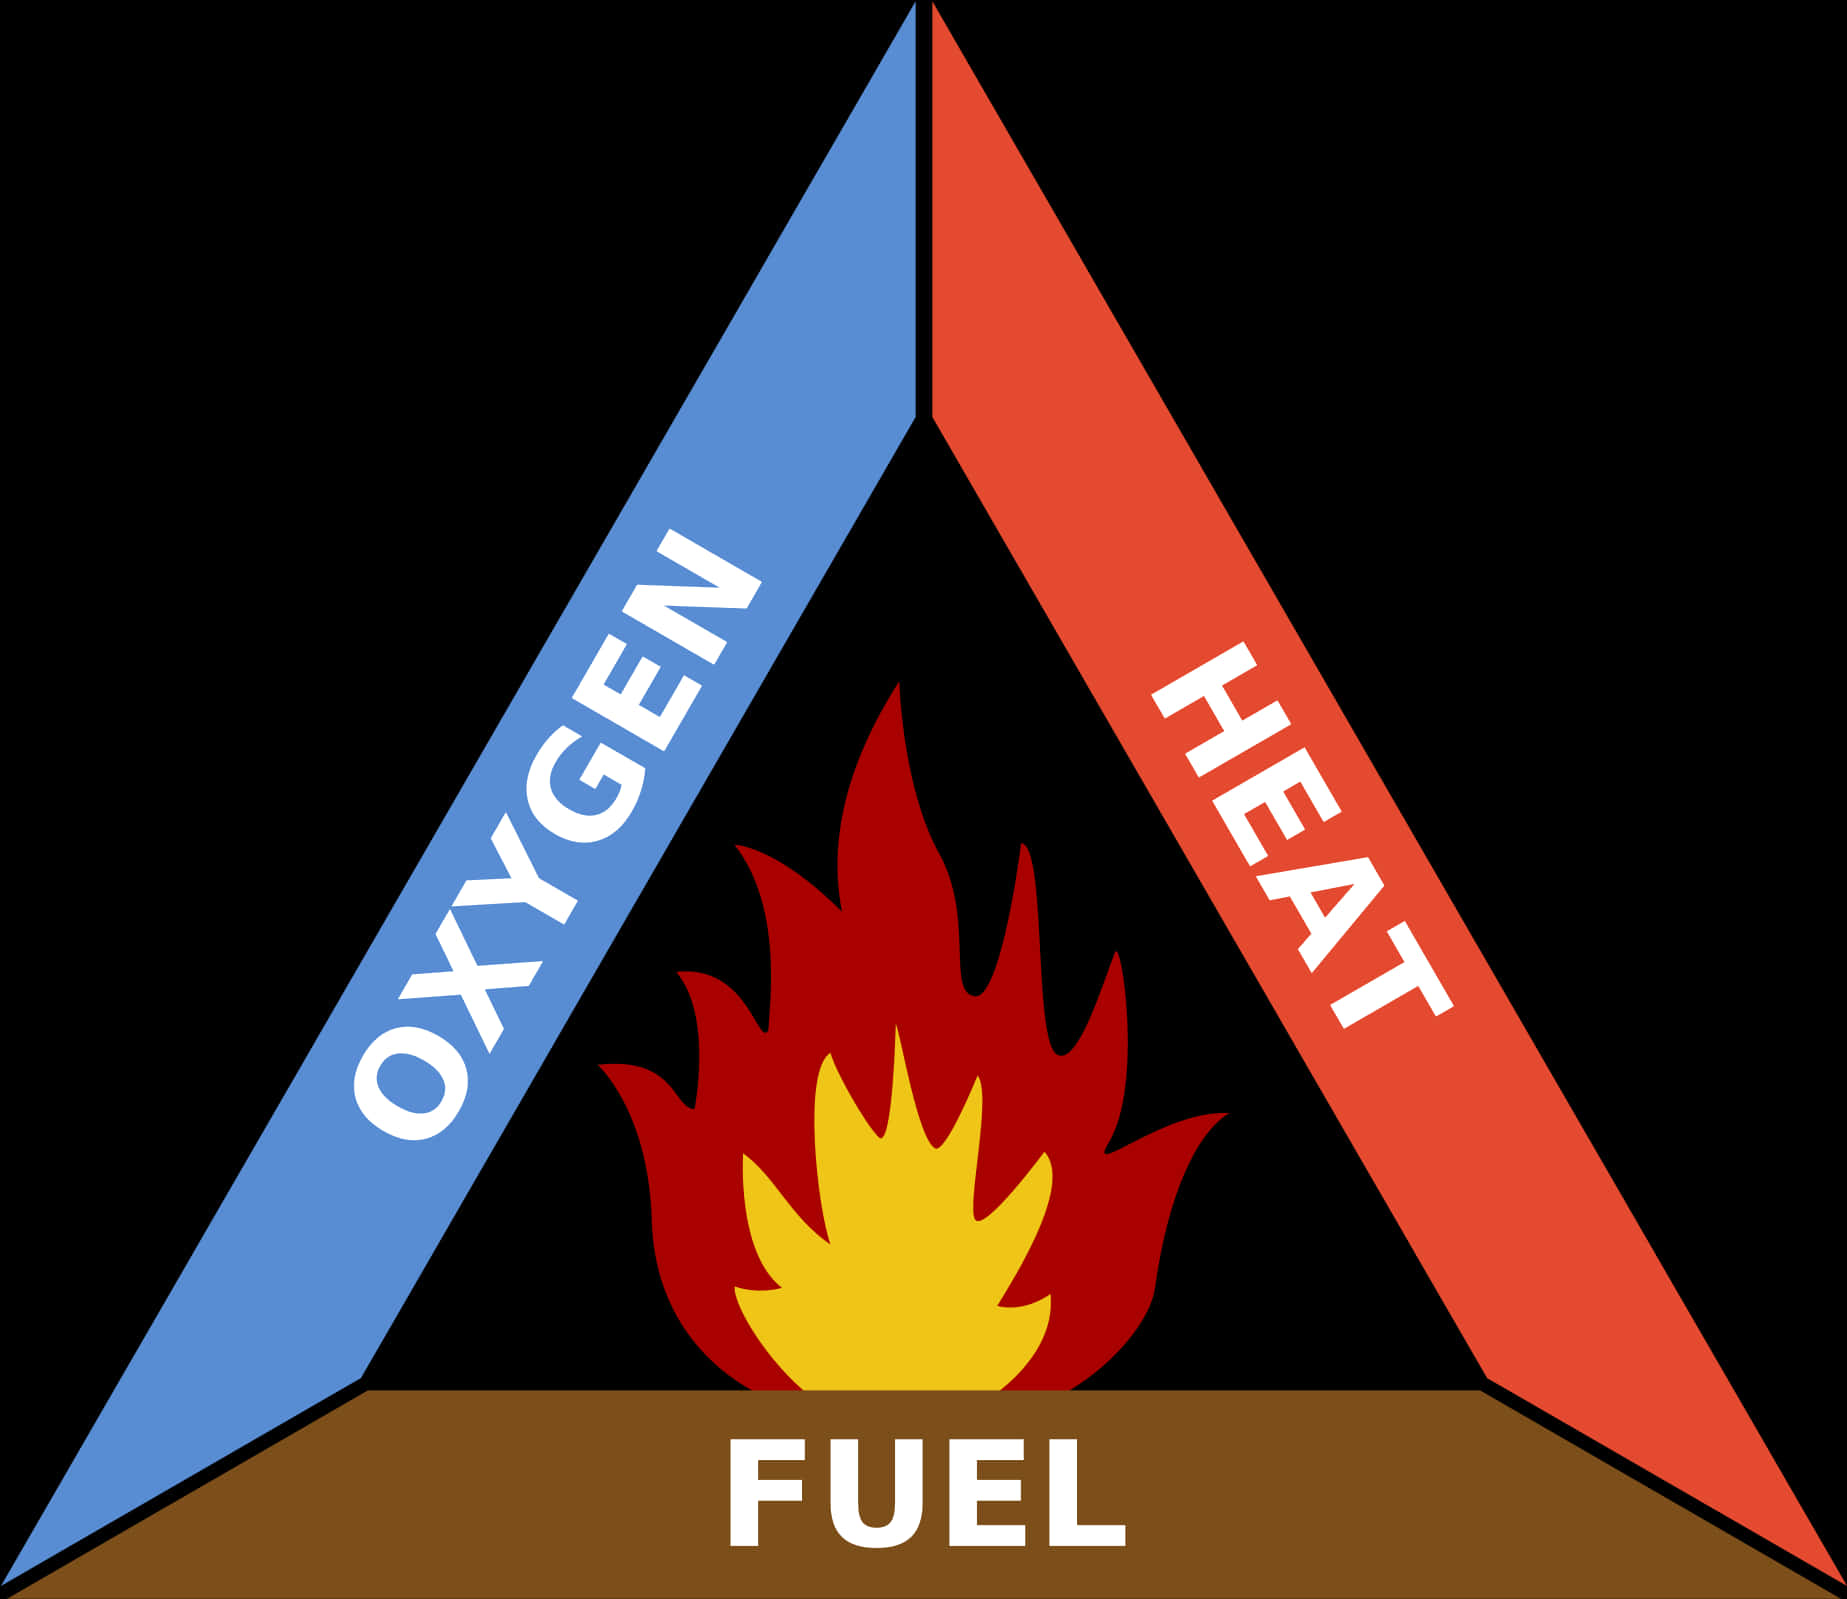 Fire Triangle Elements Illustration